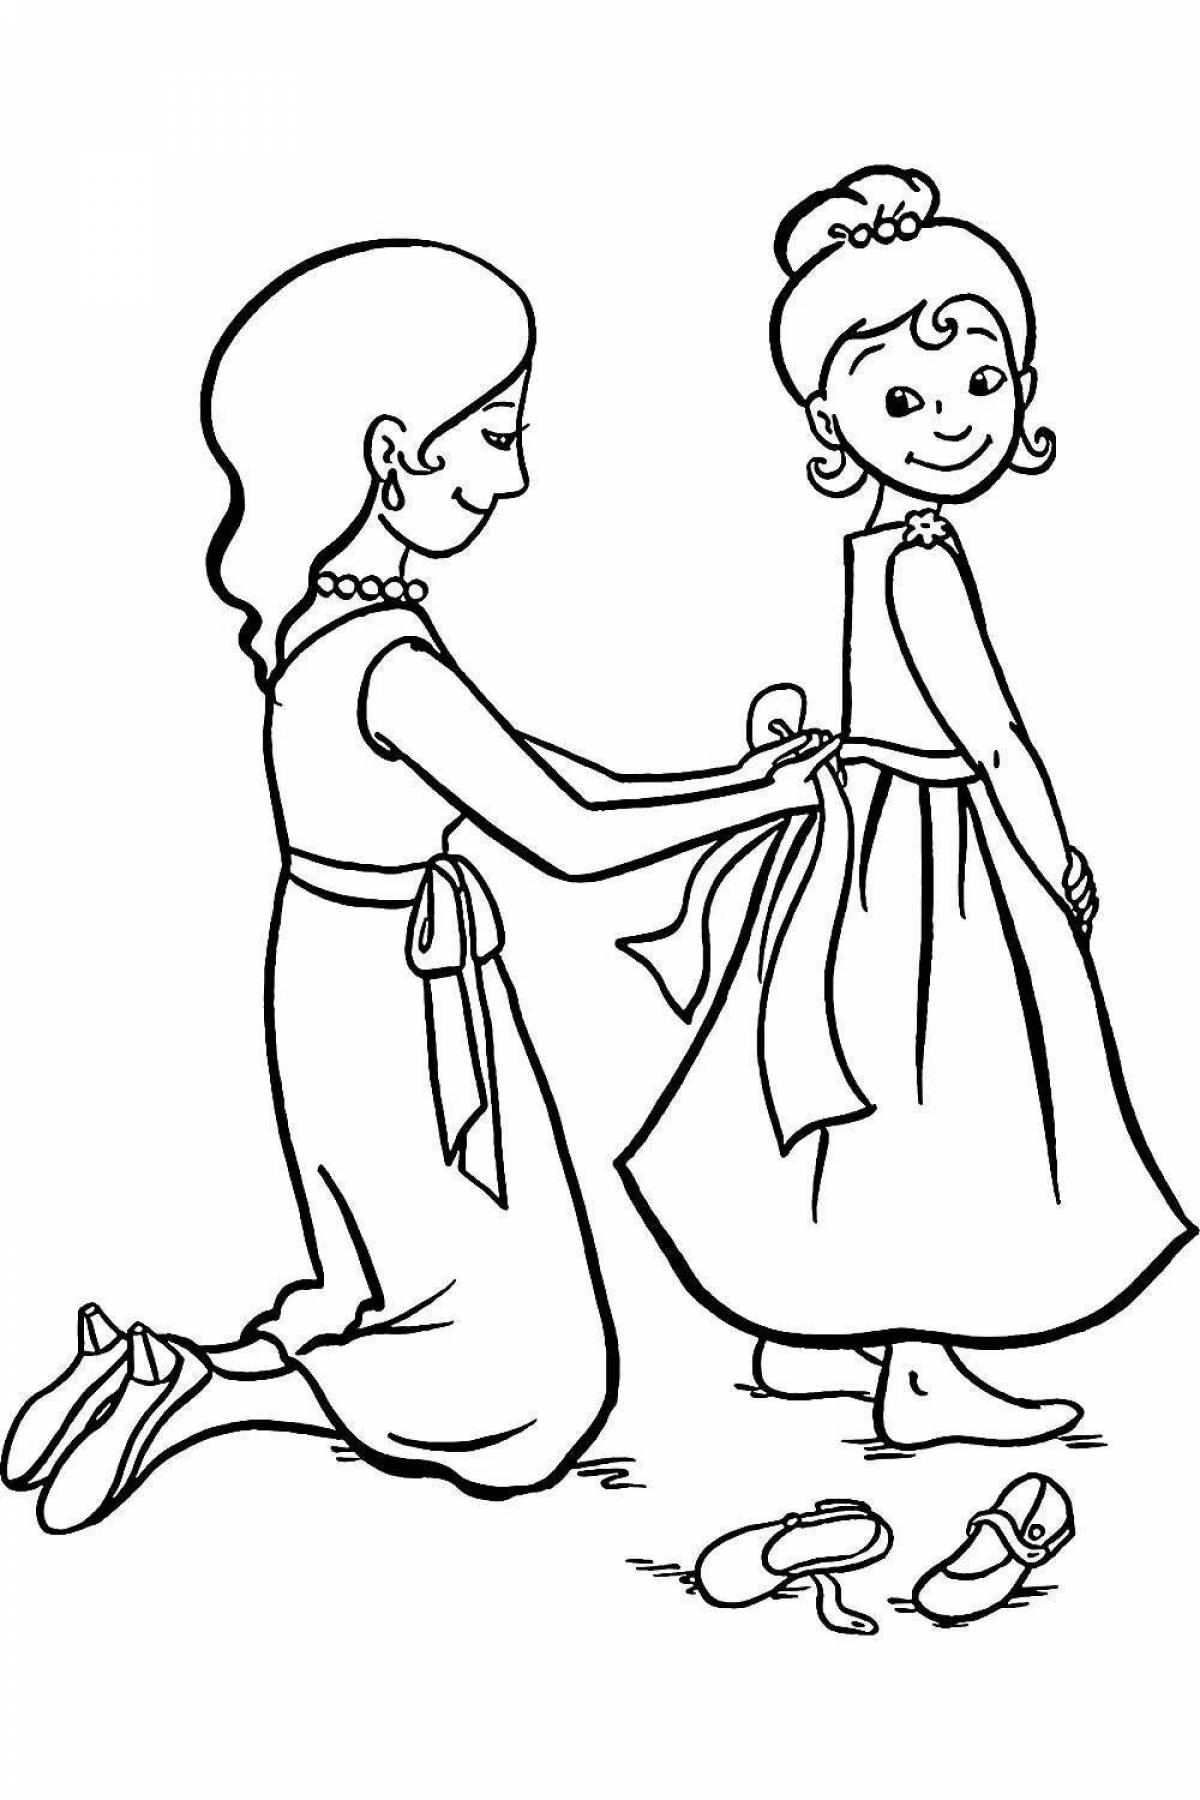 Coloring page divine mom and baby